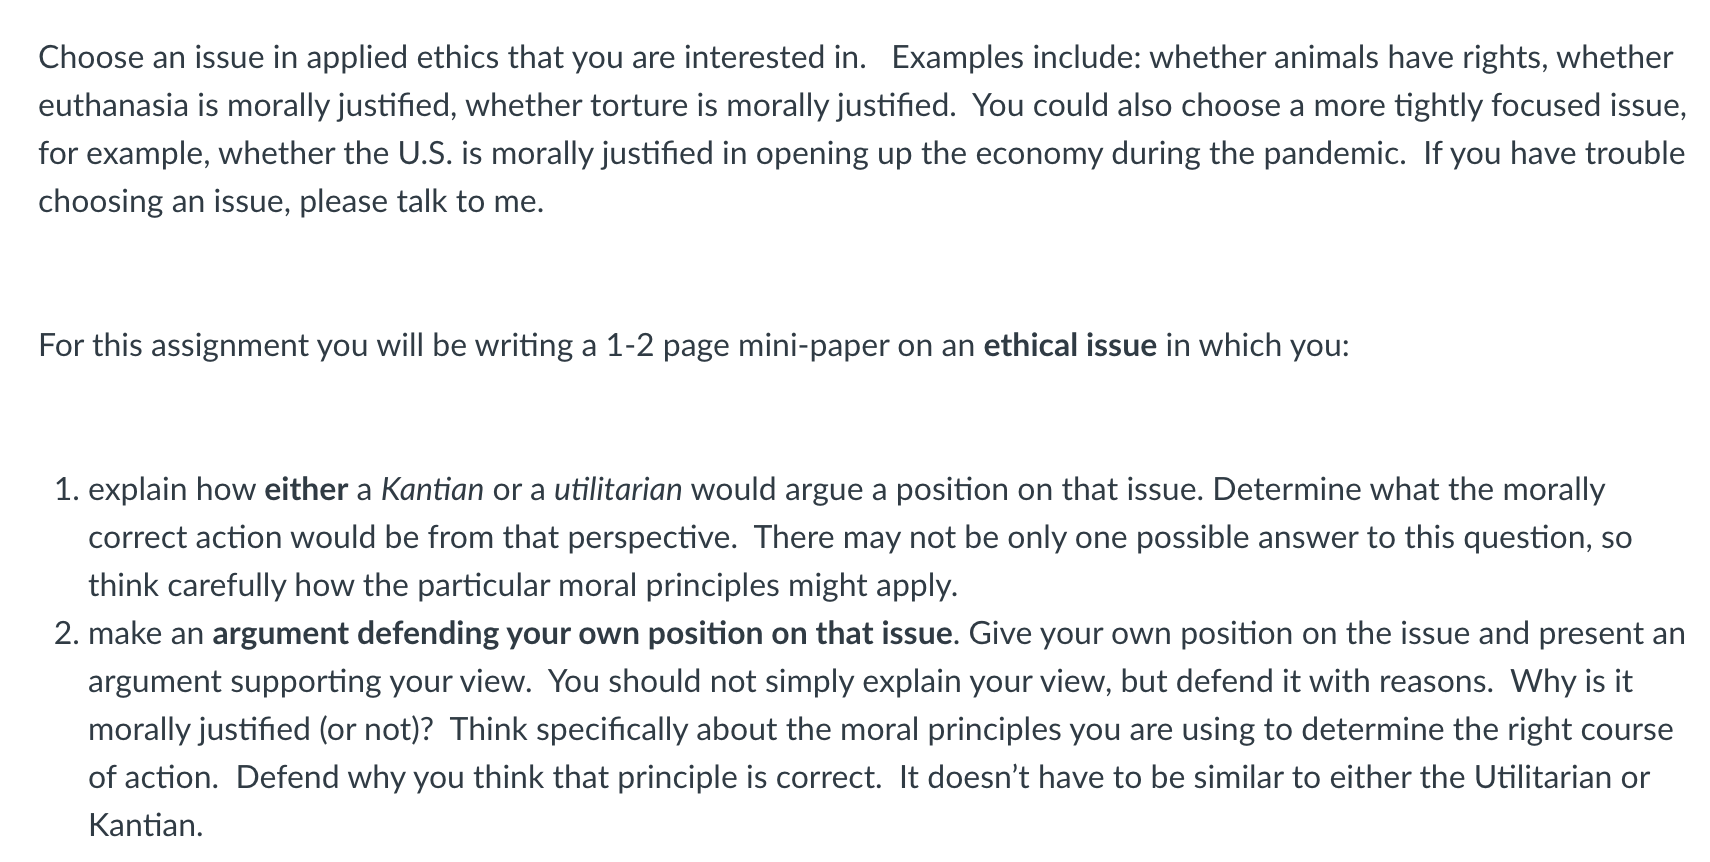 Choose an issue in applied ethics that you are 